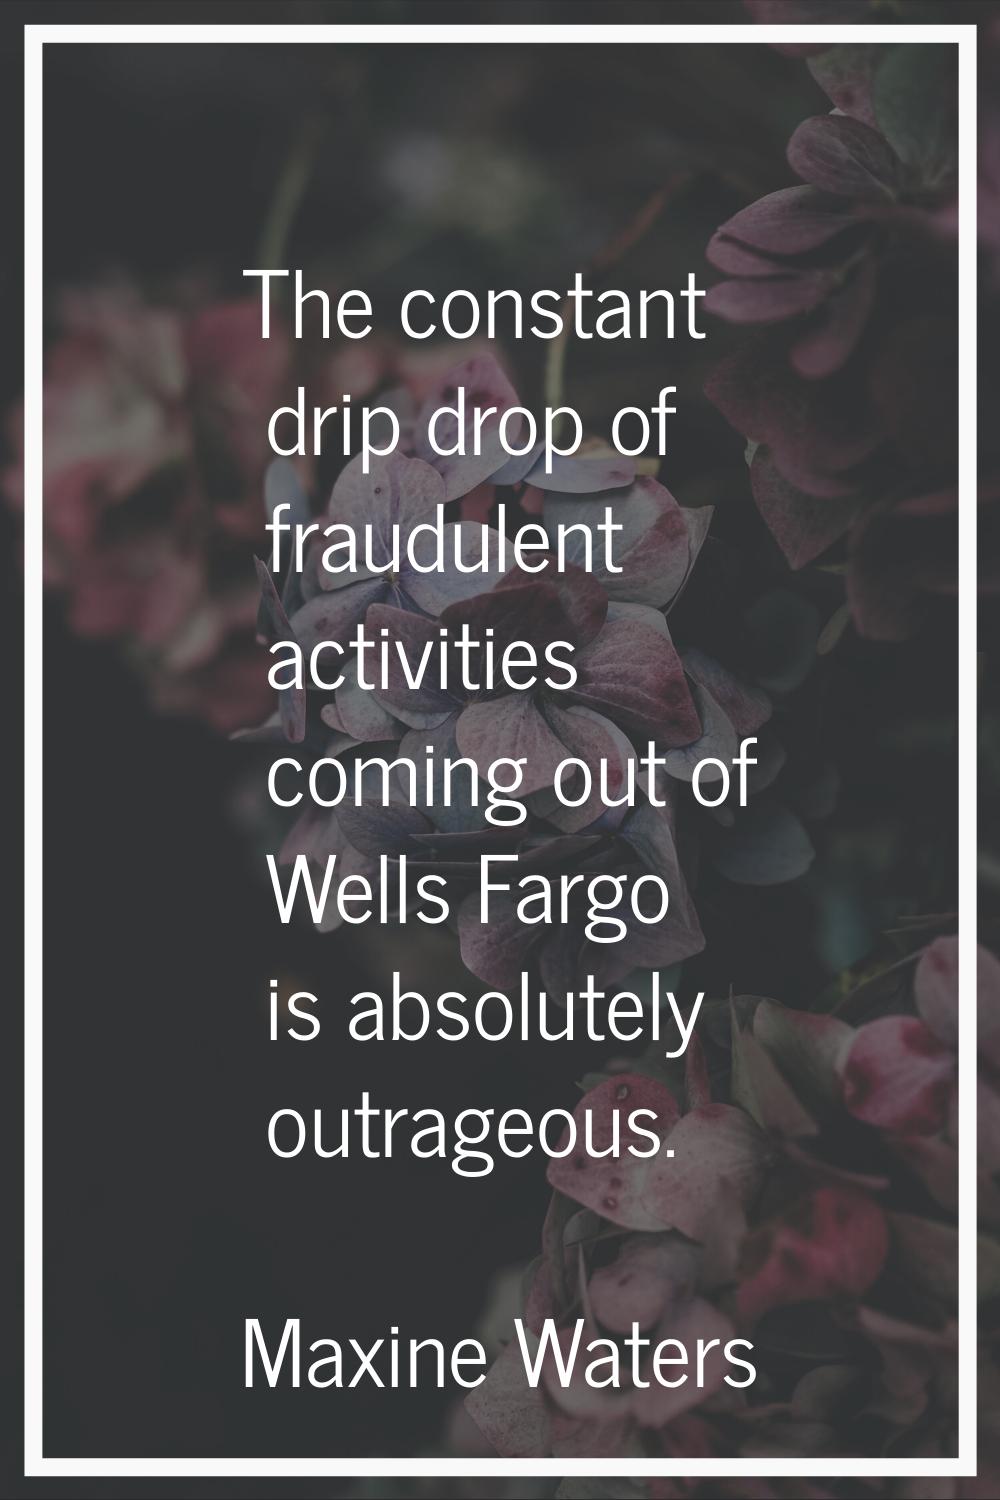 The constant drip drop of fraudulent activities coming out of Wells Fargo is absolutely outrageous.